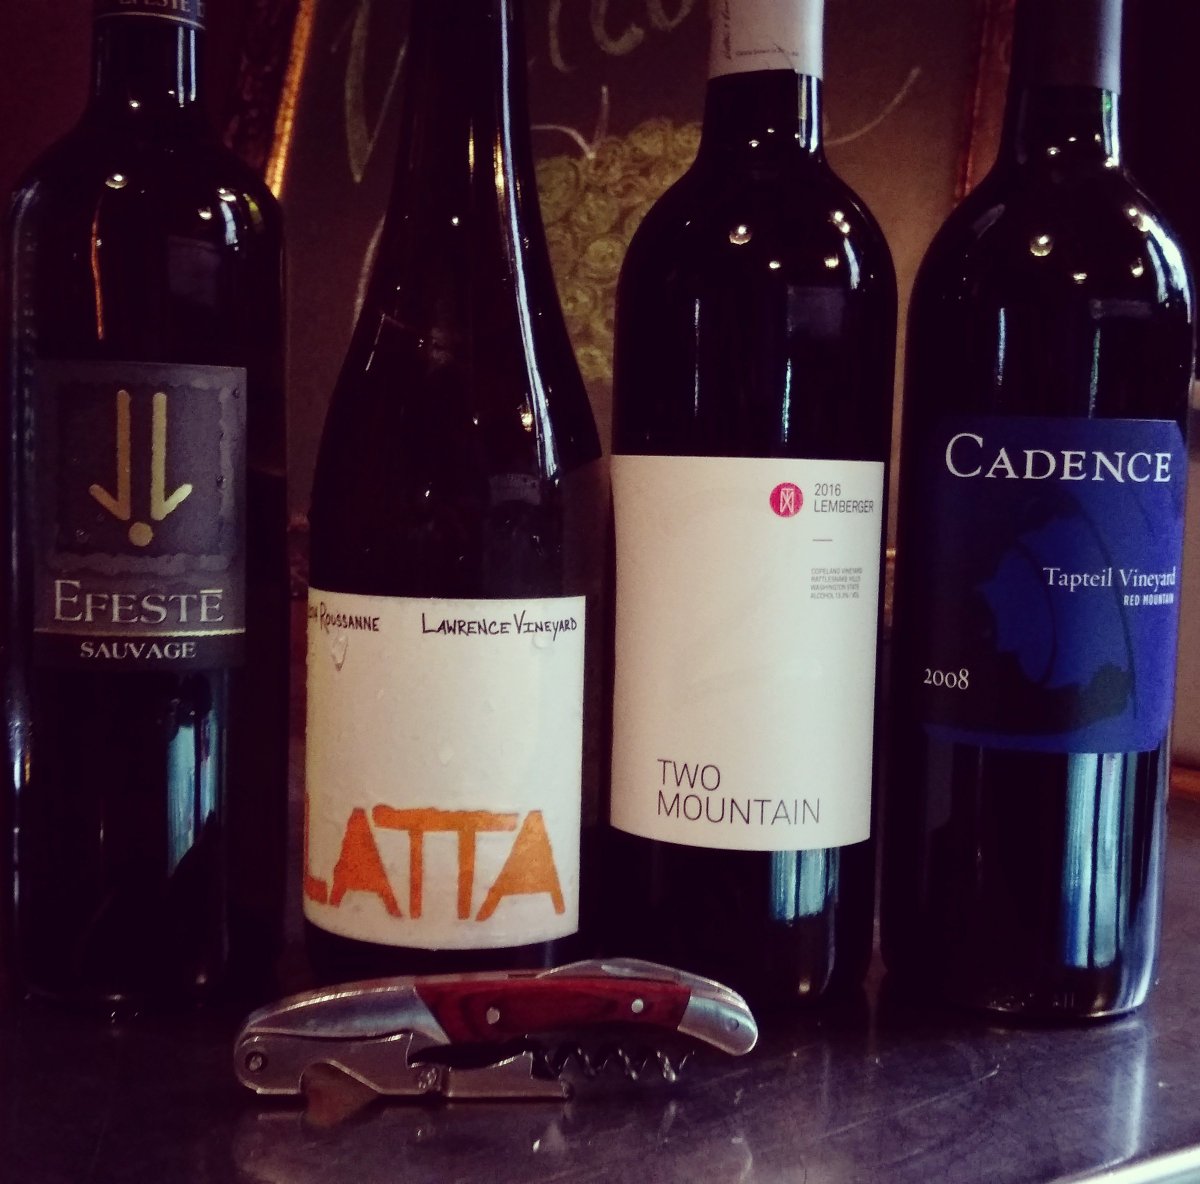 Still thinking about this super-fun Washington wine tasting and seminar I led on Tuesday, where I got to highlight some of my favorite wines from @EFESTE @lattawines @Twomountain @cadencewinery at the @PalaceBallroom #sommlife #WAWine #wine #redwine #whitewine